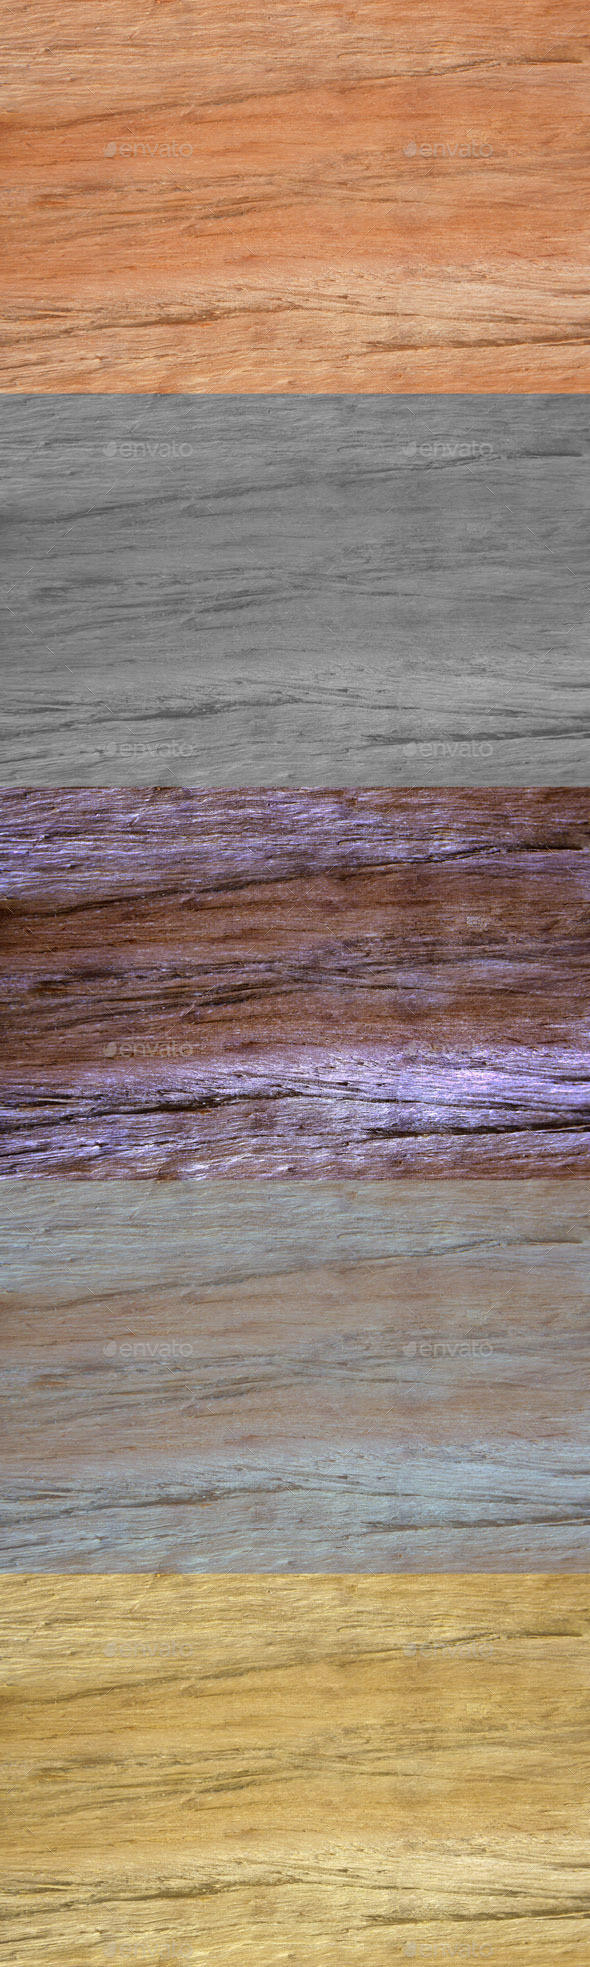 Wood 20texture 20v5a 20preview